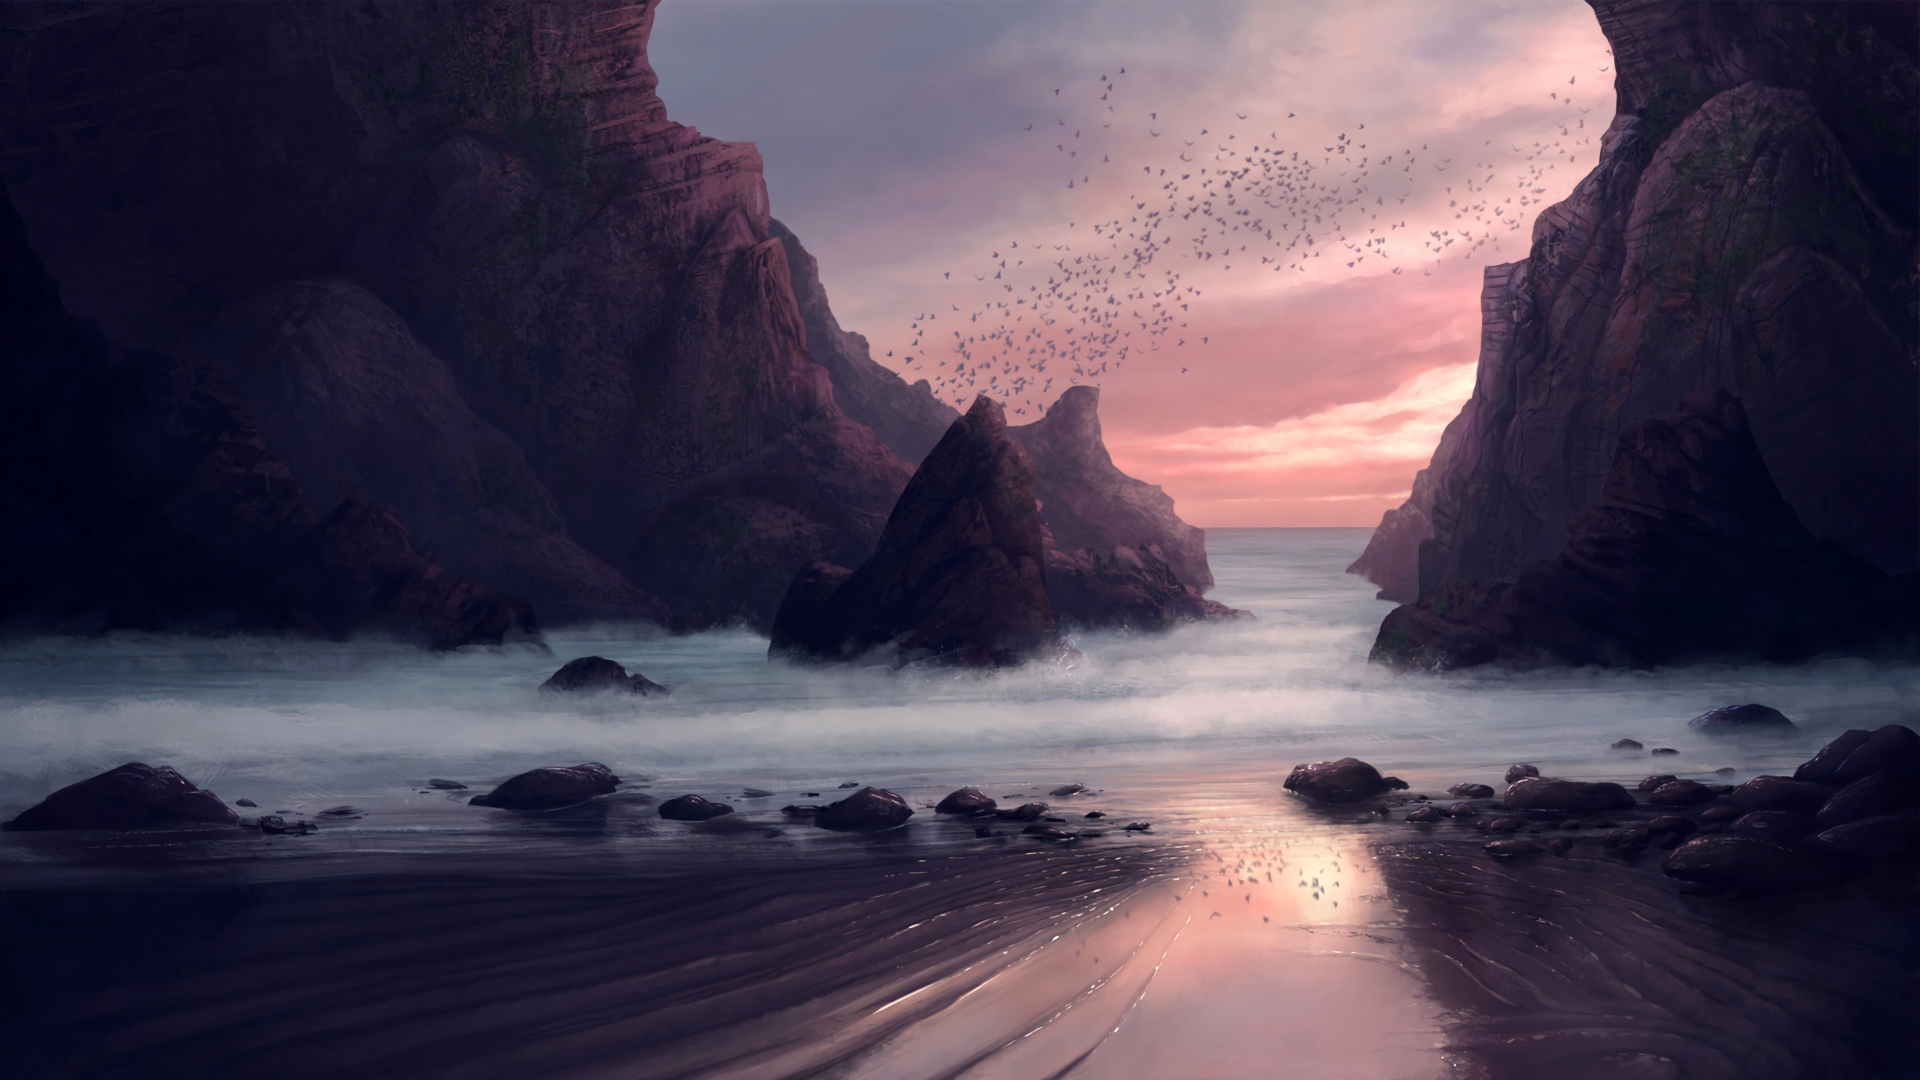 A flock of birds flies over the rocks by the sea